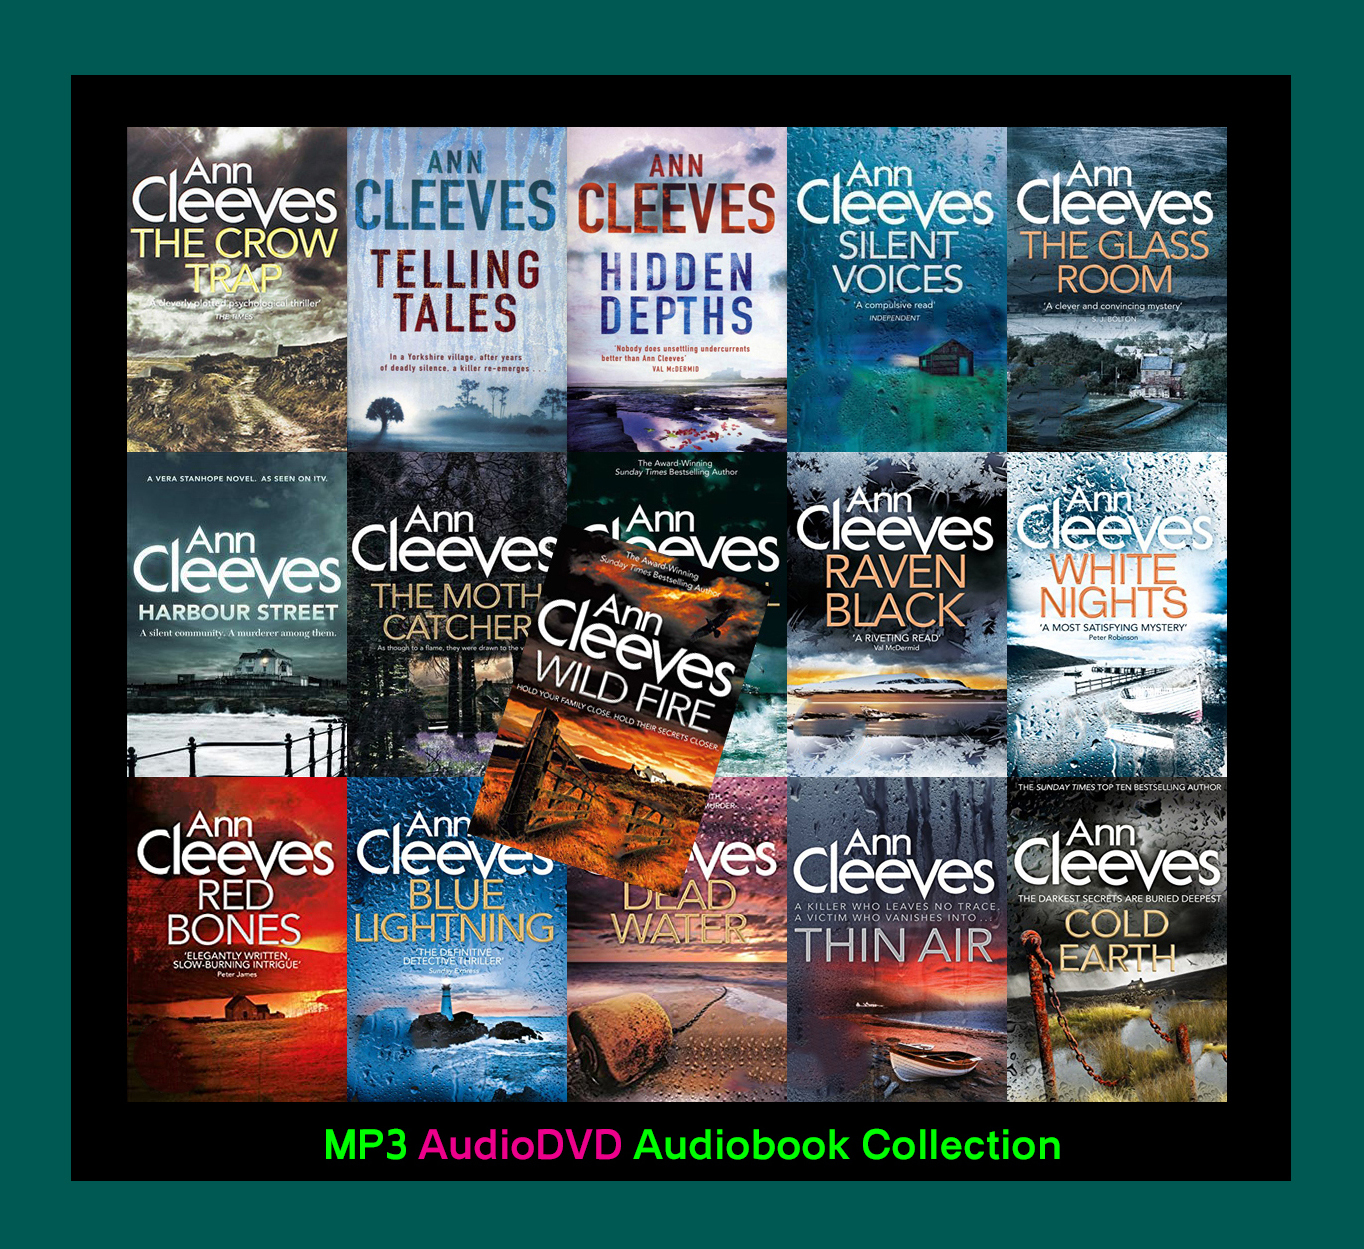 The VERA & SHETLAND Series By Ann Cleeves (16 Audiobook Collection MP3 AudioDVD)